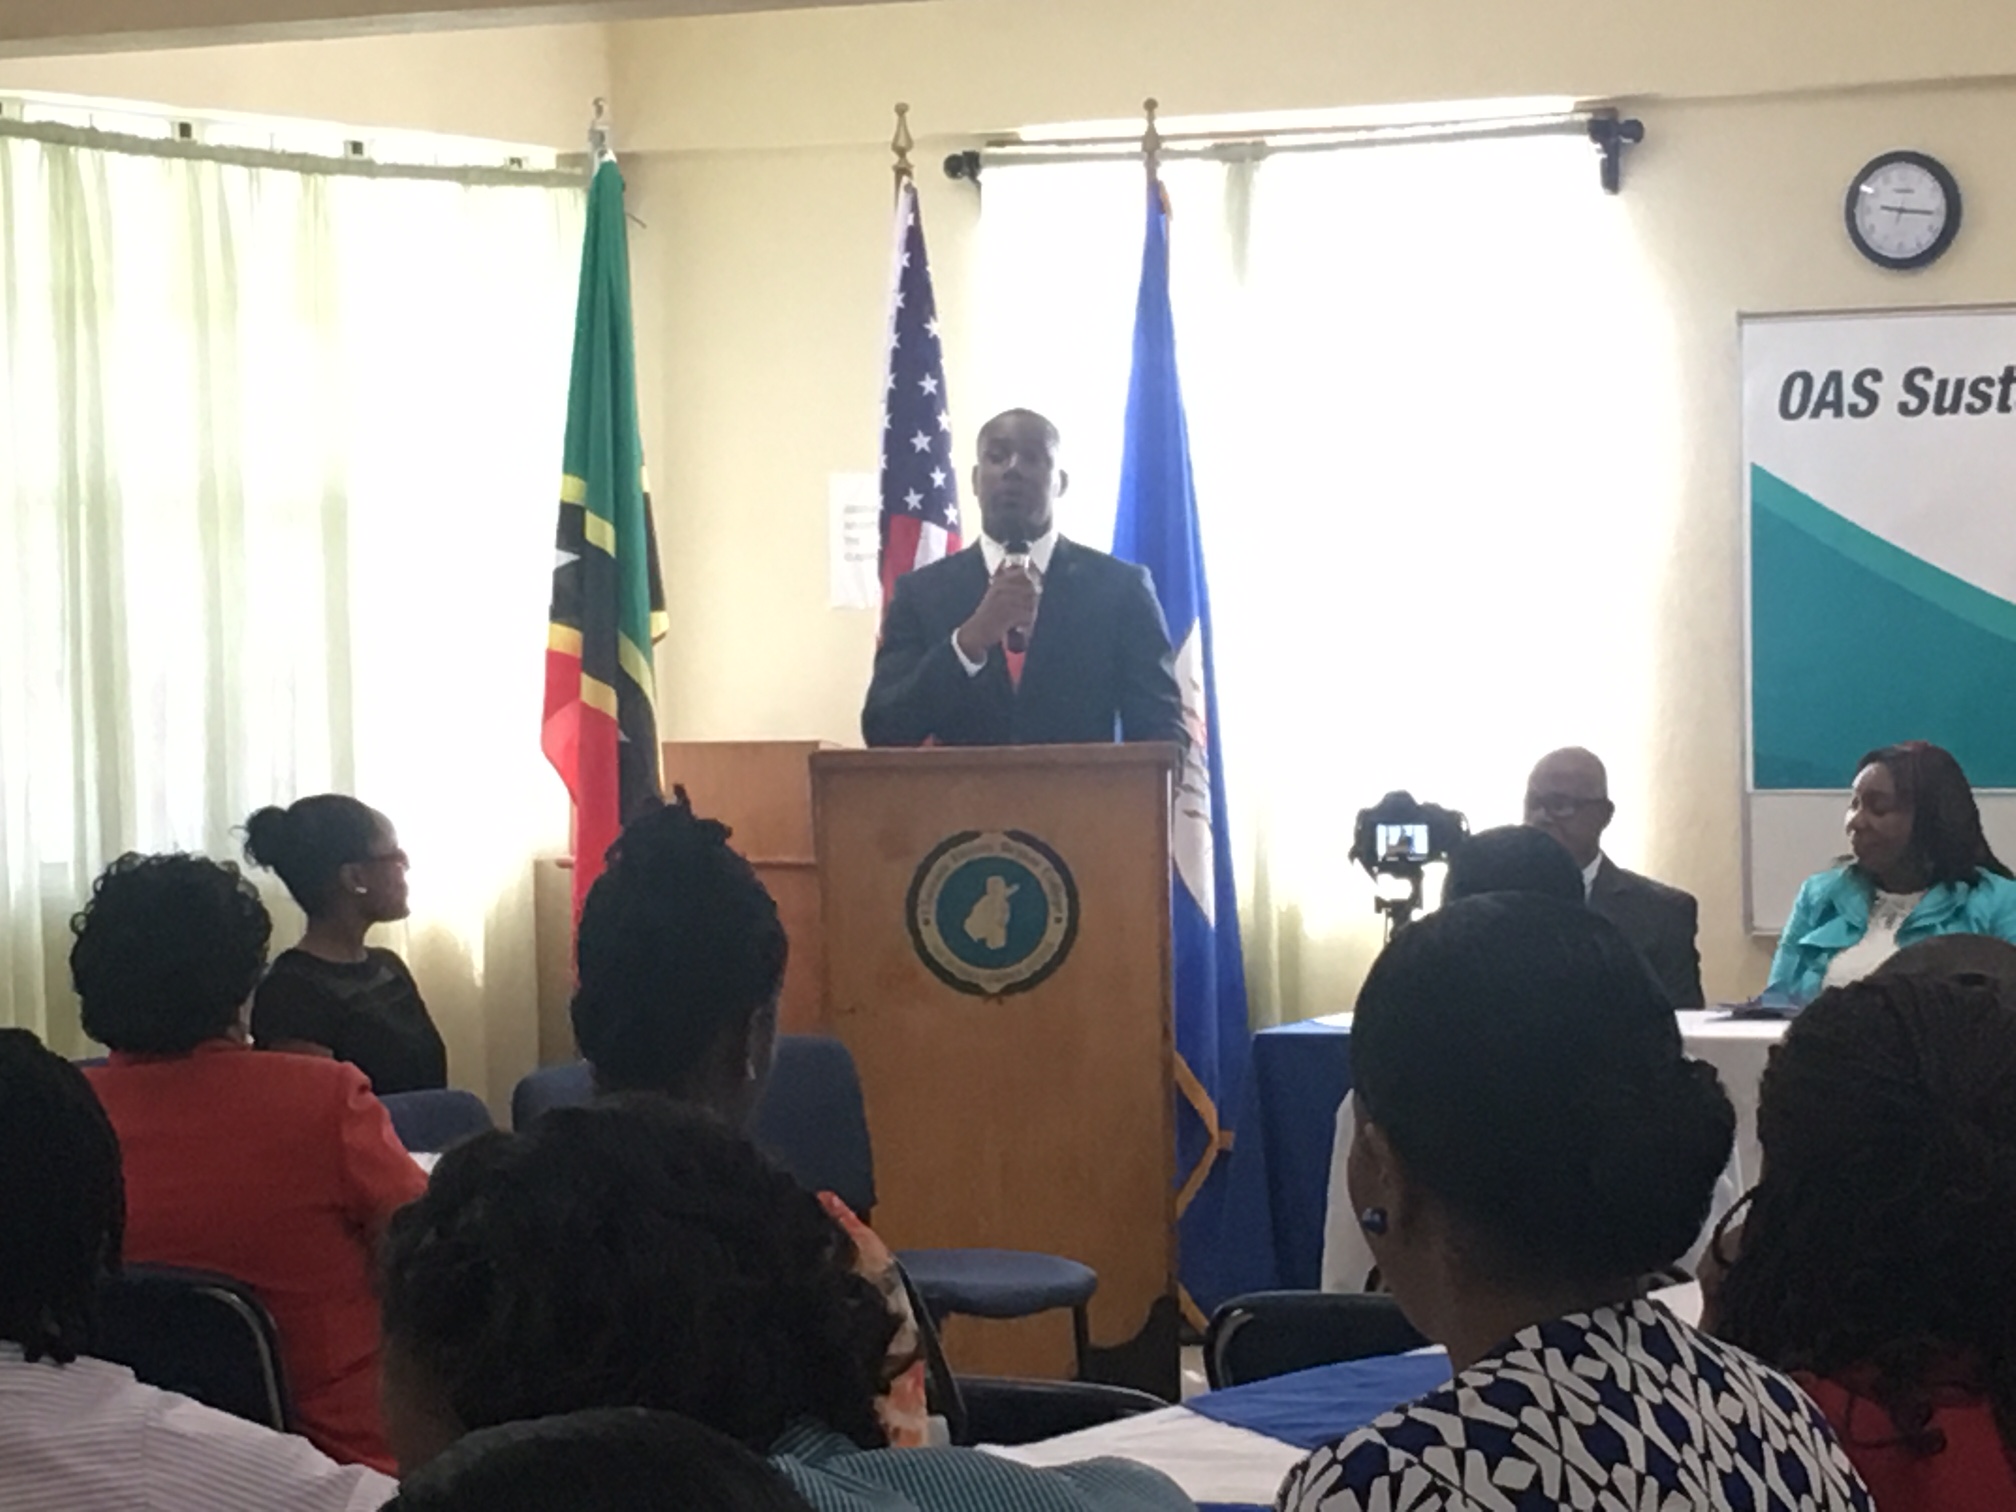 OAS Thirteenth Sustainable Cities Course Opening Ceremony - May 31, 2017 - Hosted by the Clarence Fitzroy Bryant College - St Kitts and Nevis(June 6, 2017)